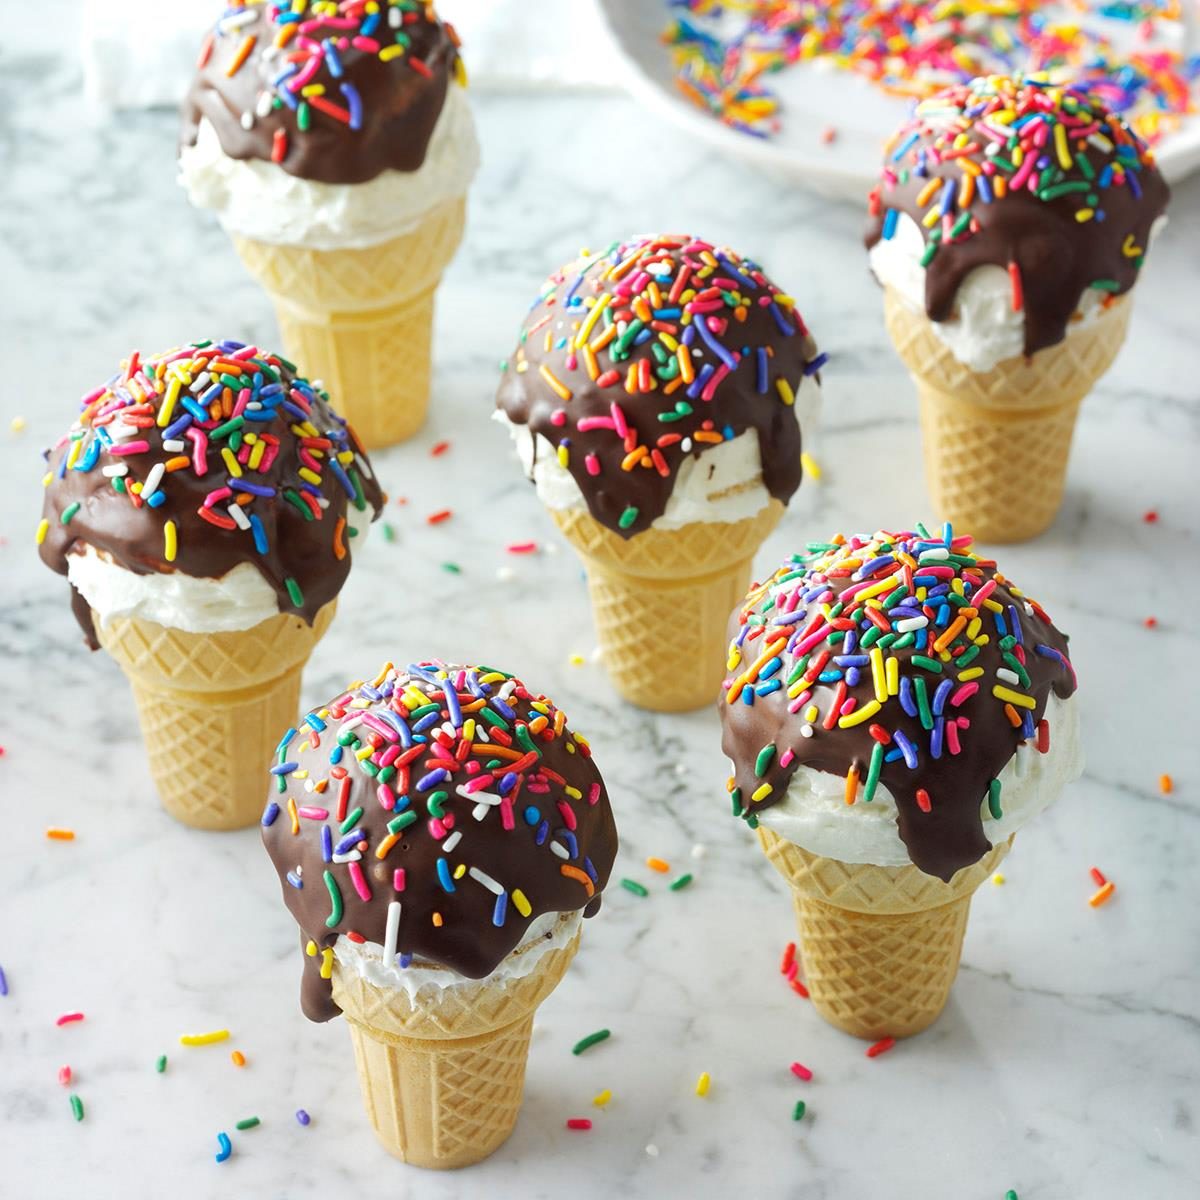 https://www.tasteofhome.com/wp-content/uploads/2018/01/Chocolate-Dipped-Ice-Cream-Cone-Cupcakes_EXPS_HC17_185649_D10_18_7b-1.jpg